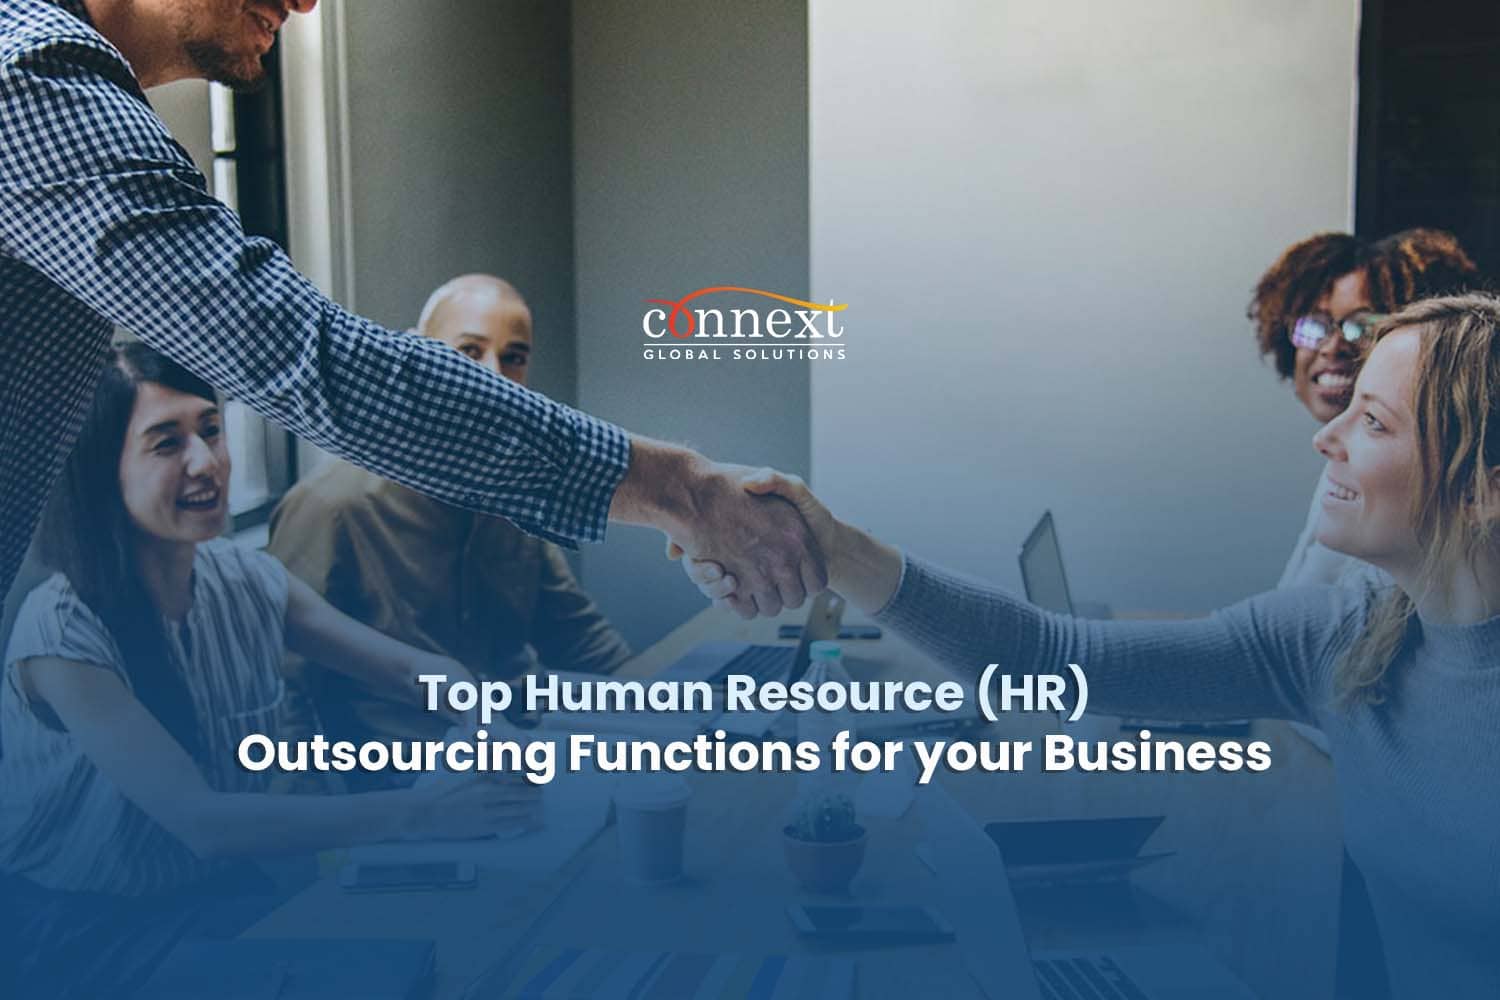 Top Human Resource (HR) Outsourcing Functions for your Business